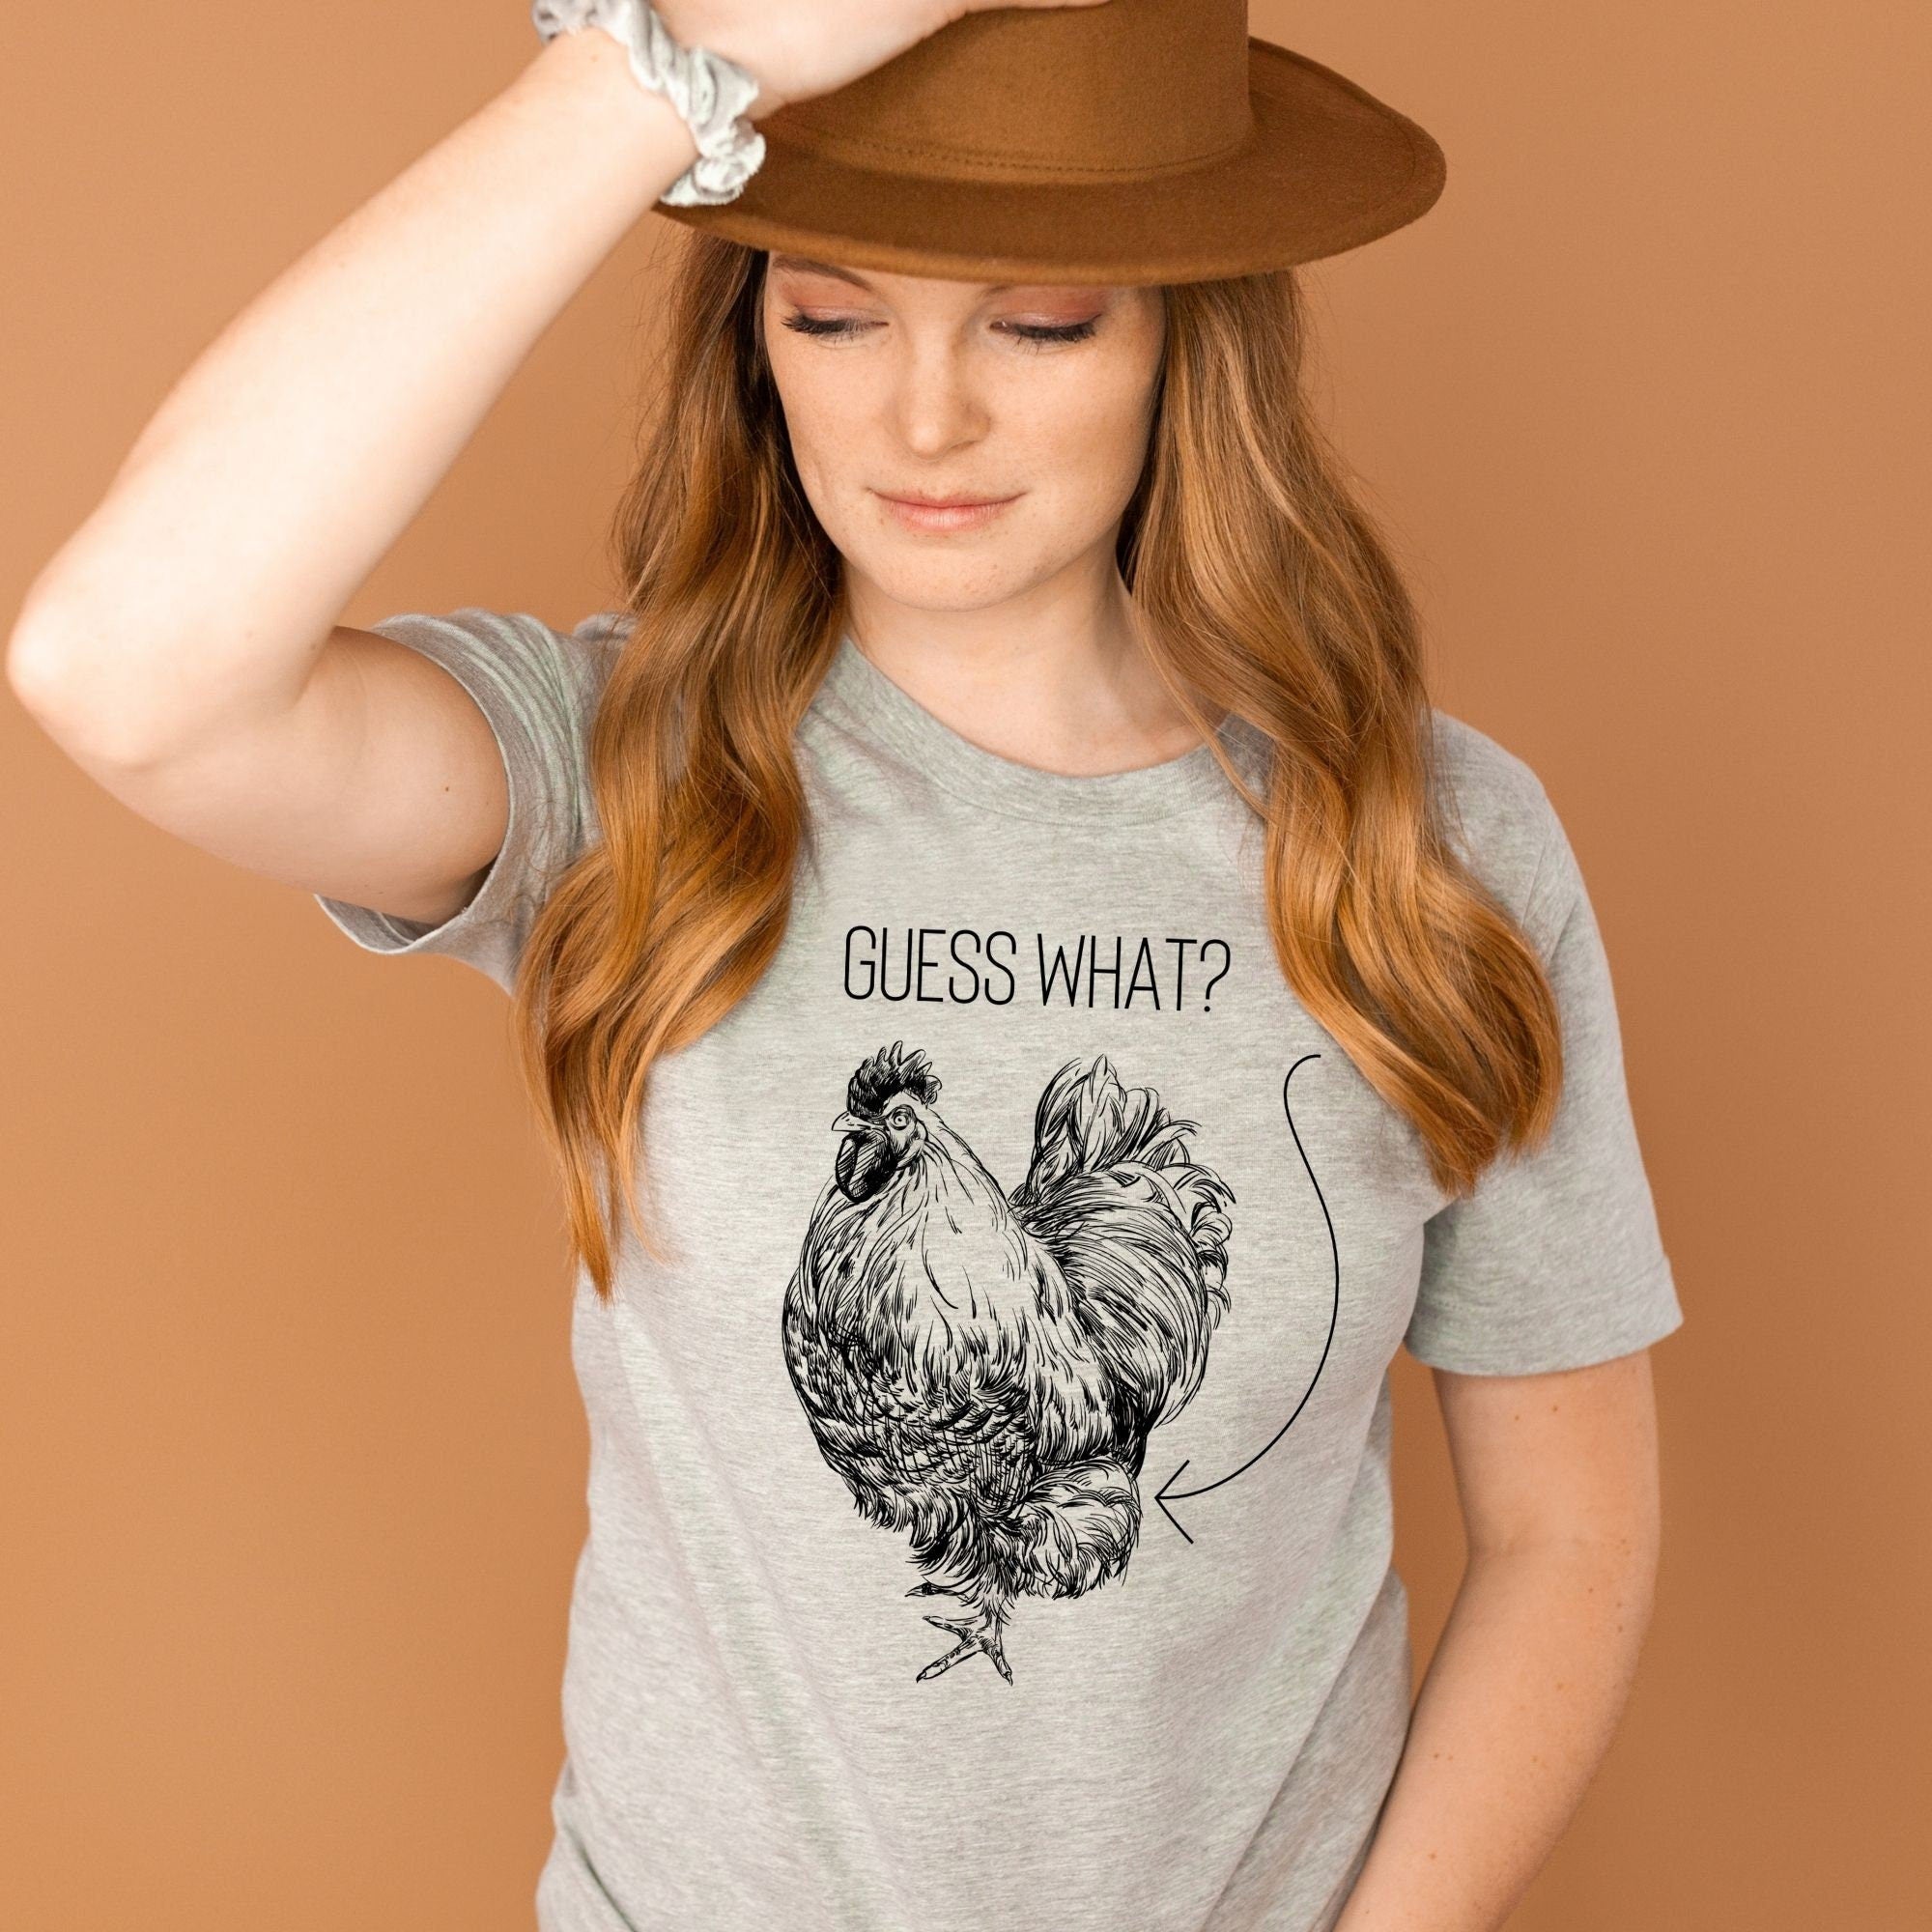 Guess What? CHICKEN BUTT Funny Graphic Tee *UNISEX FIT*-208 Tees Wholesale, Idaho